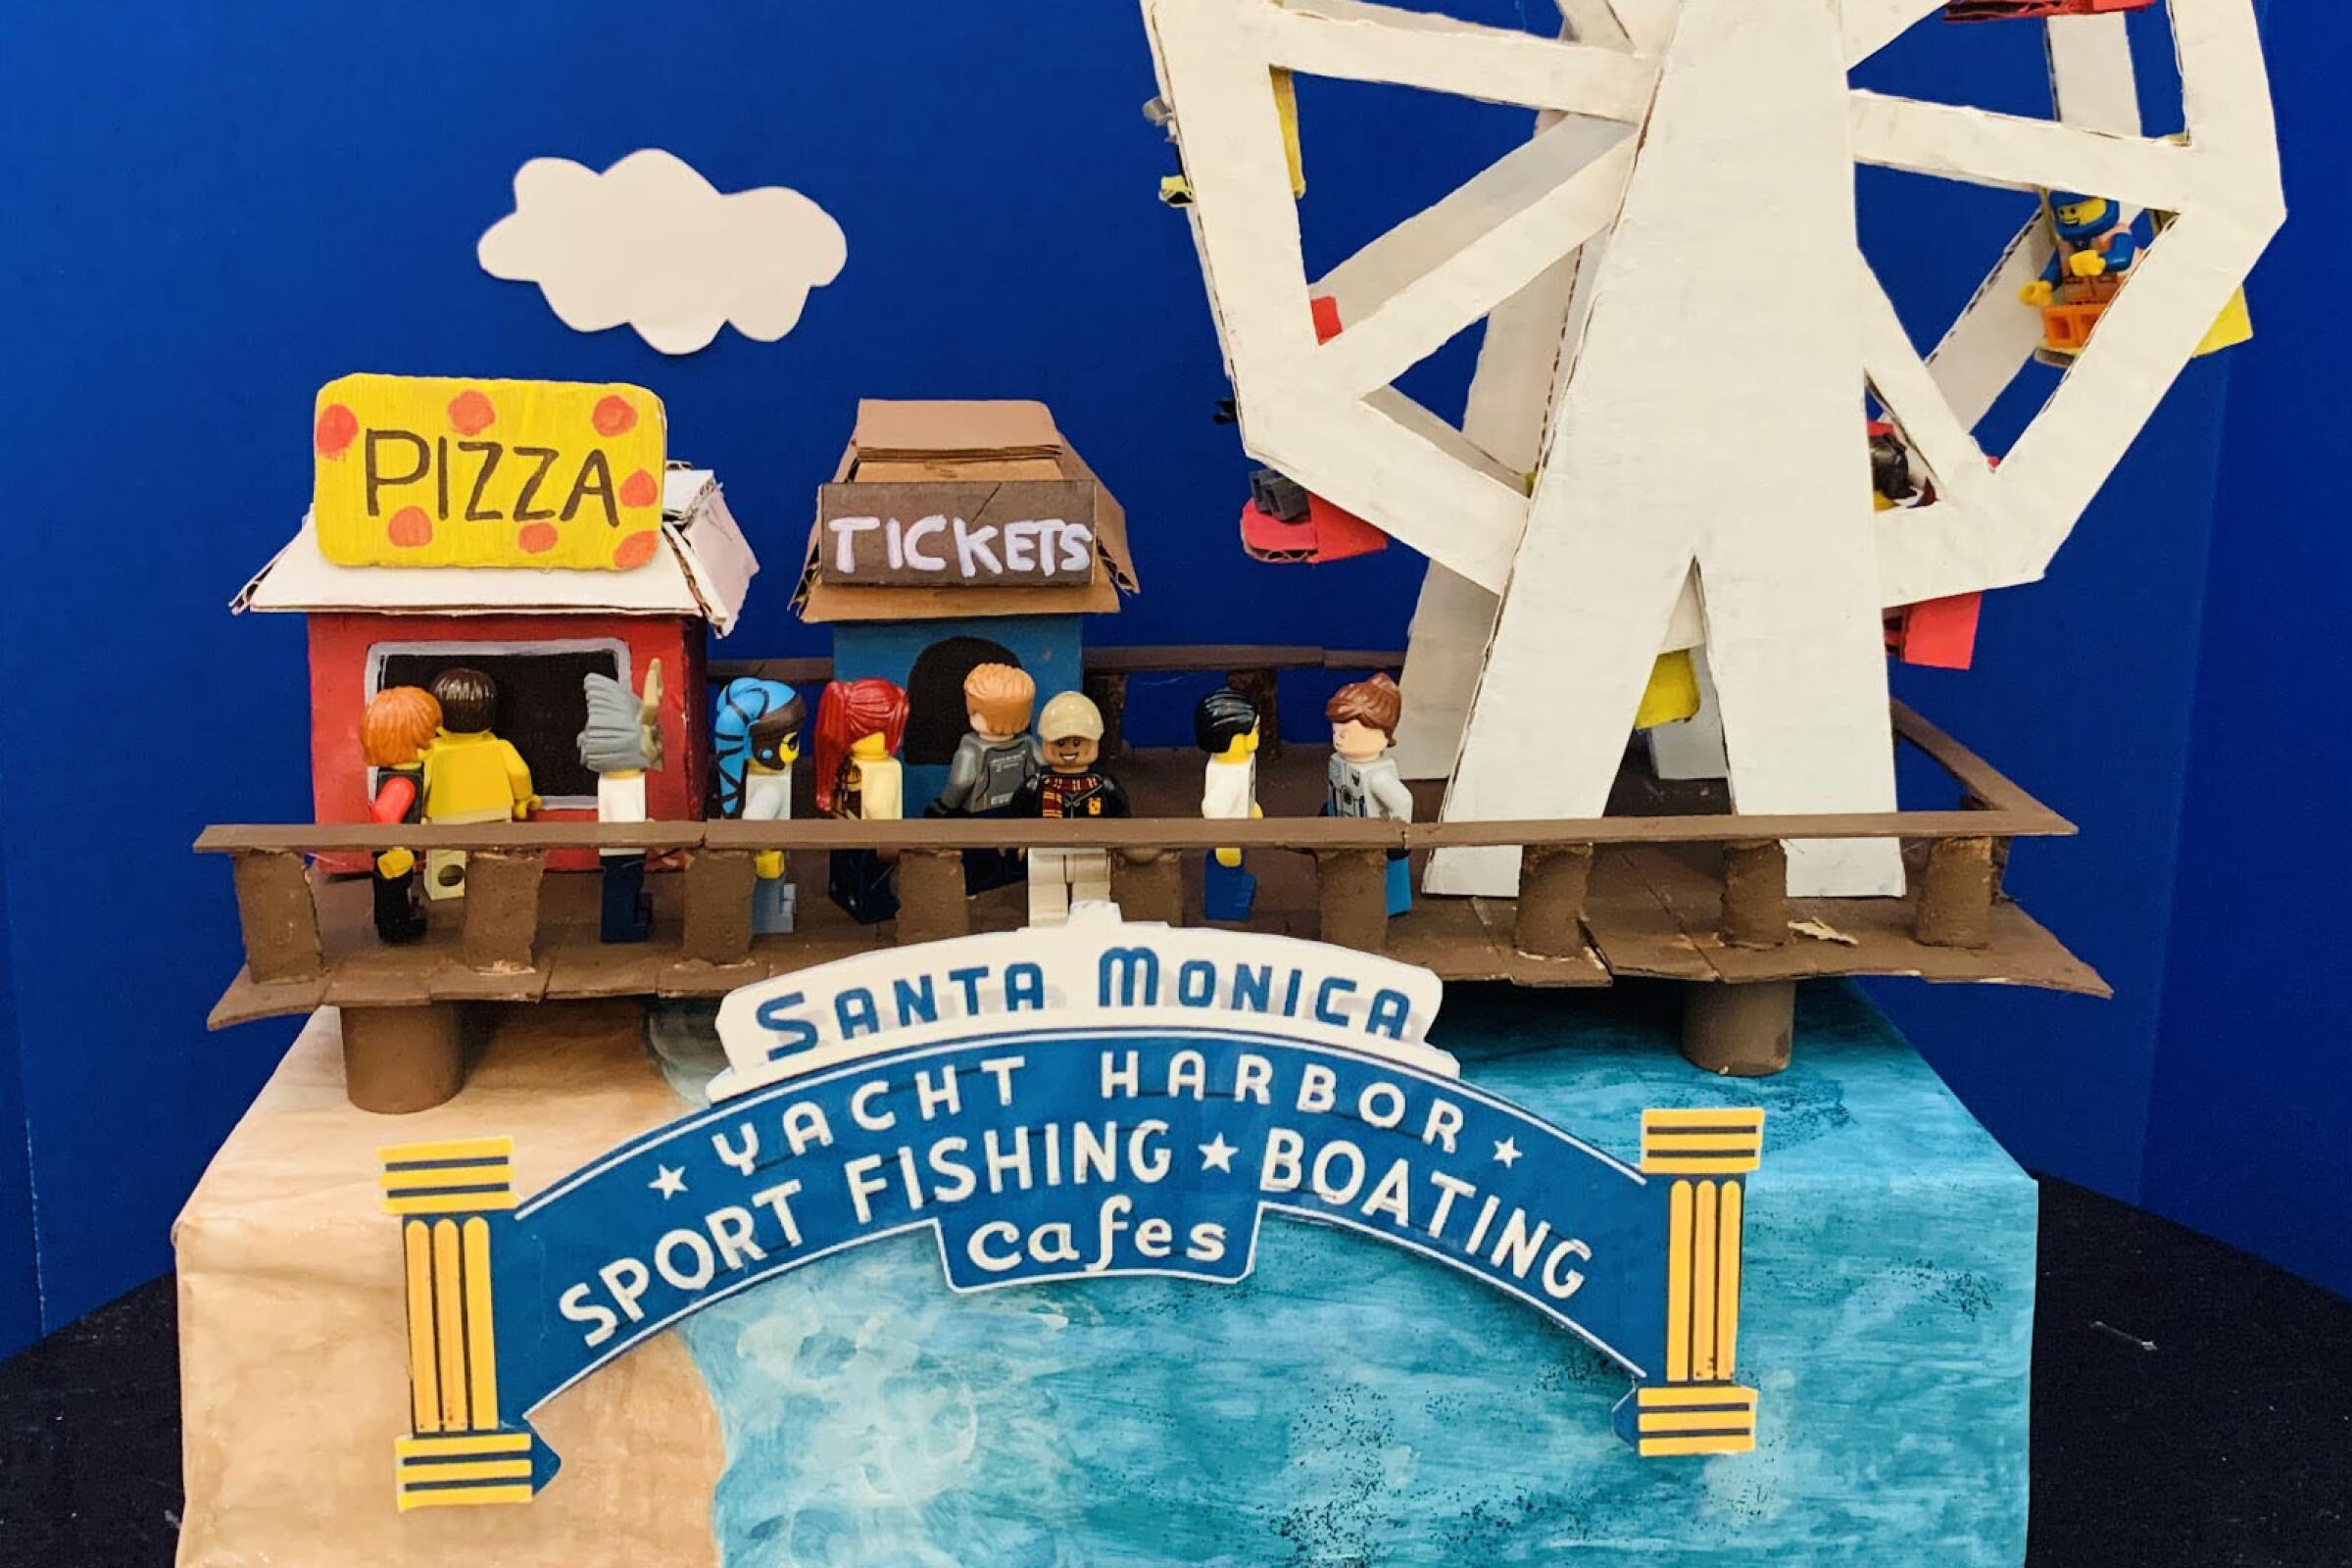 Fourth-grader Jaden Manchanda of San Marino's K.L. Carver Elementary School made this model of the Santa Monica Pier. Says Jaden: "It has many shops, food stands, roller coasters, and an amazing Ferris wheel that is sky-high."